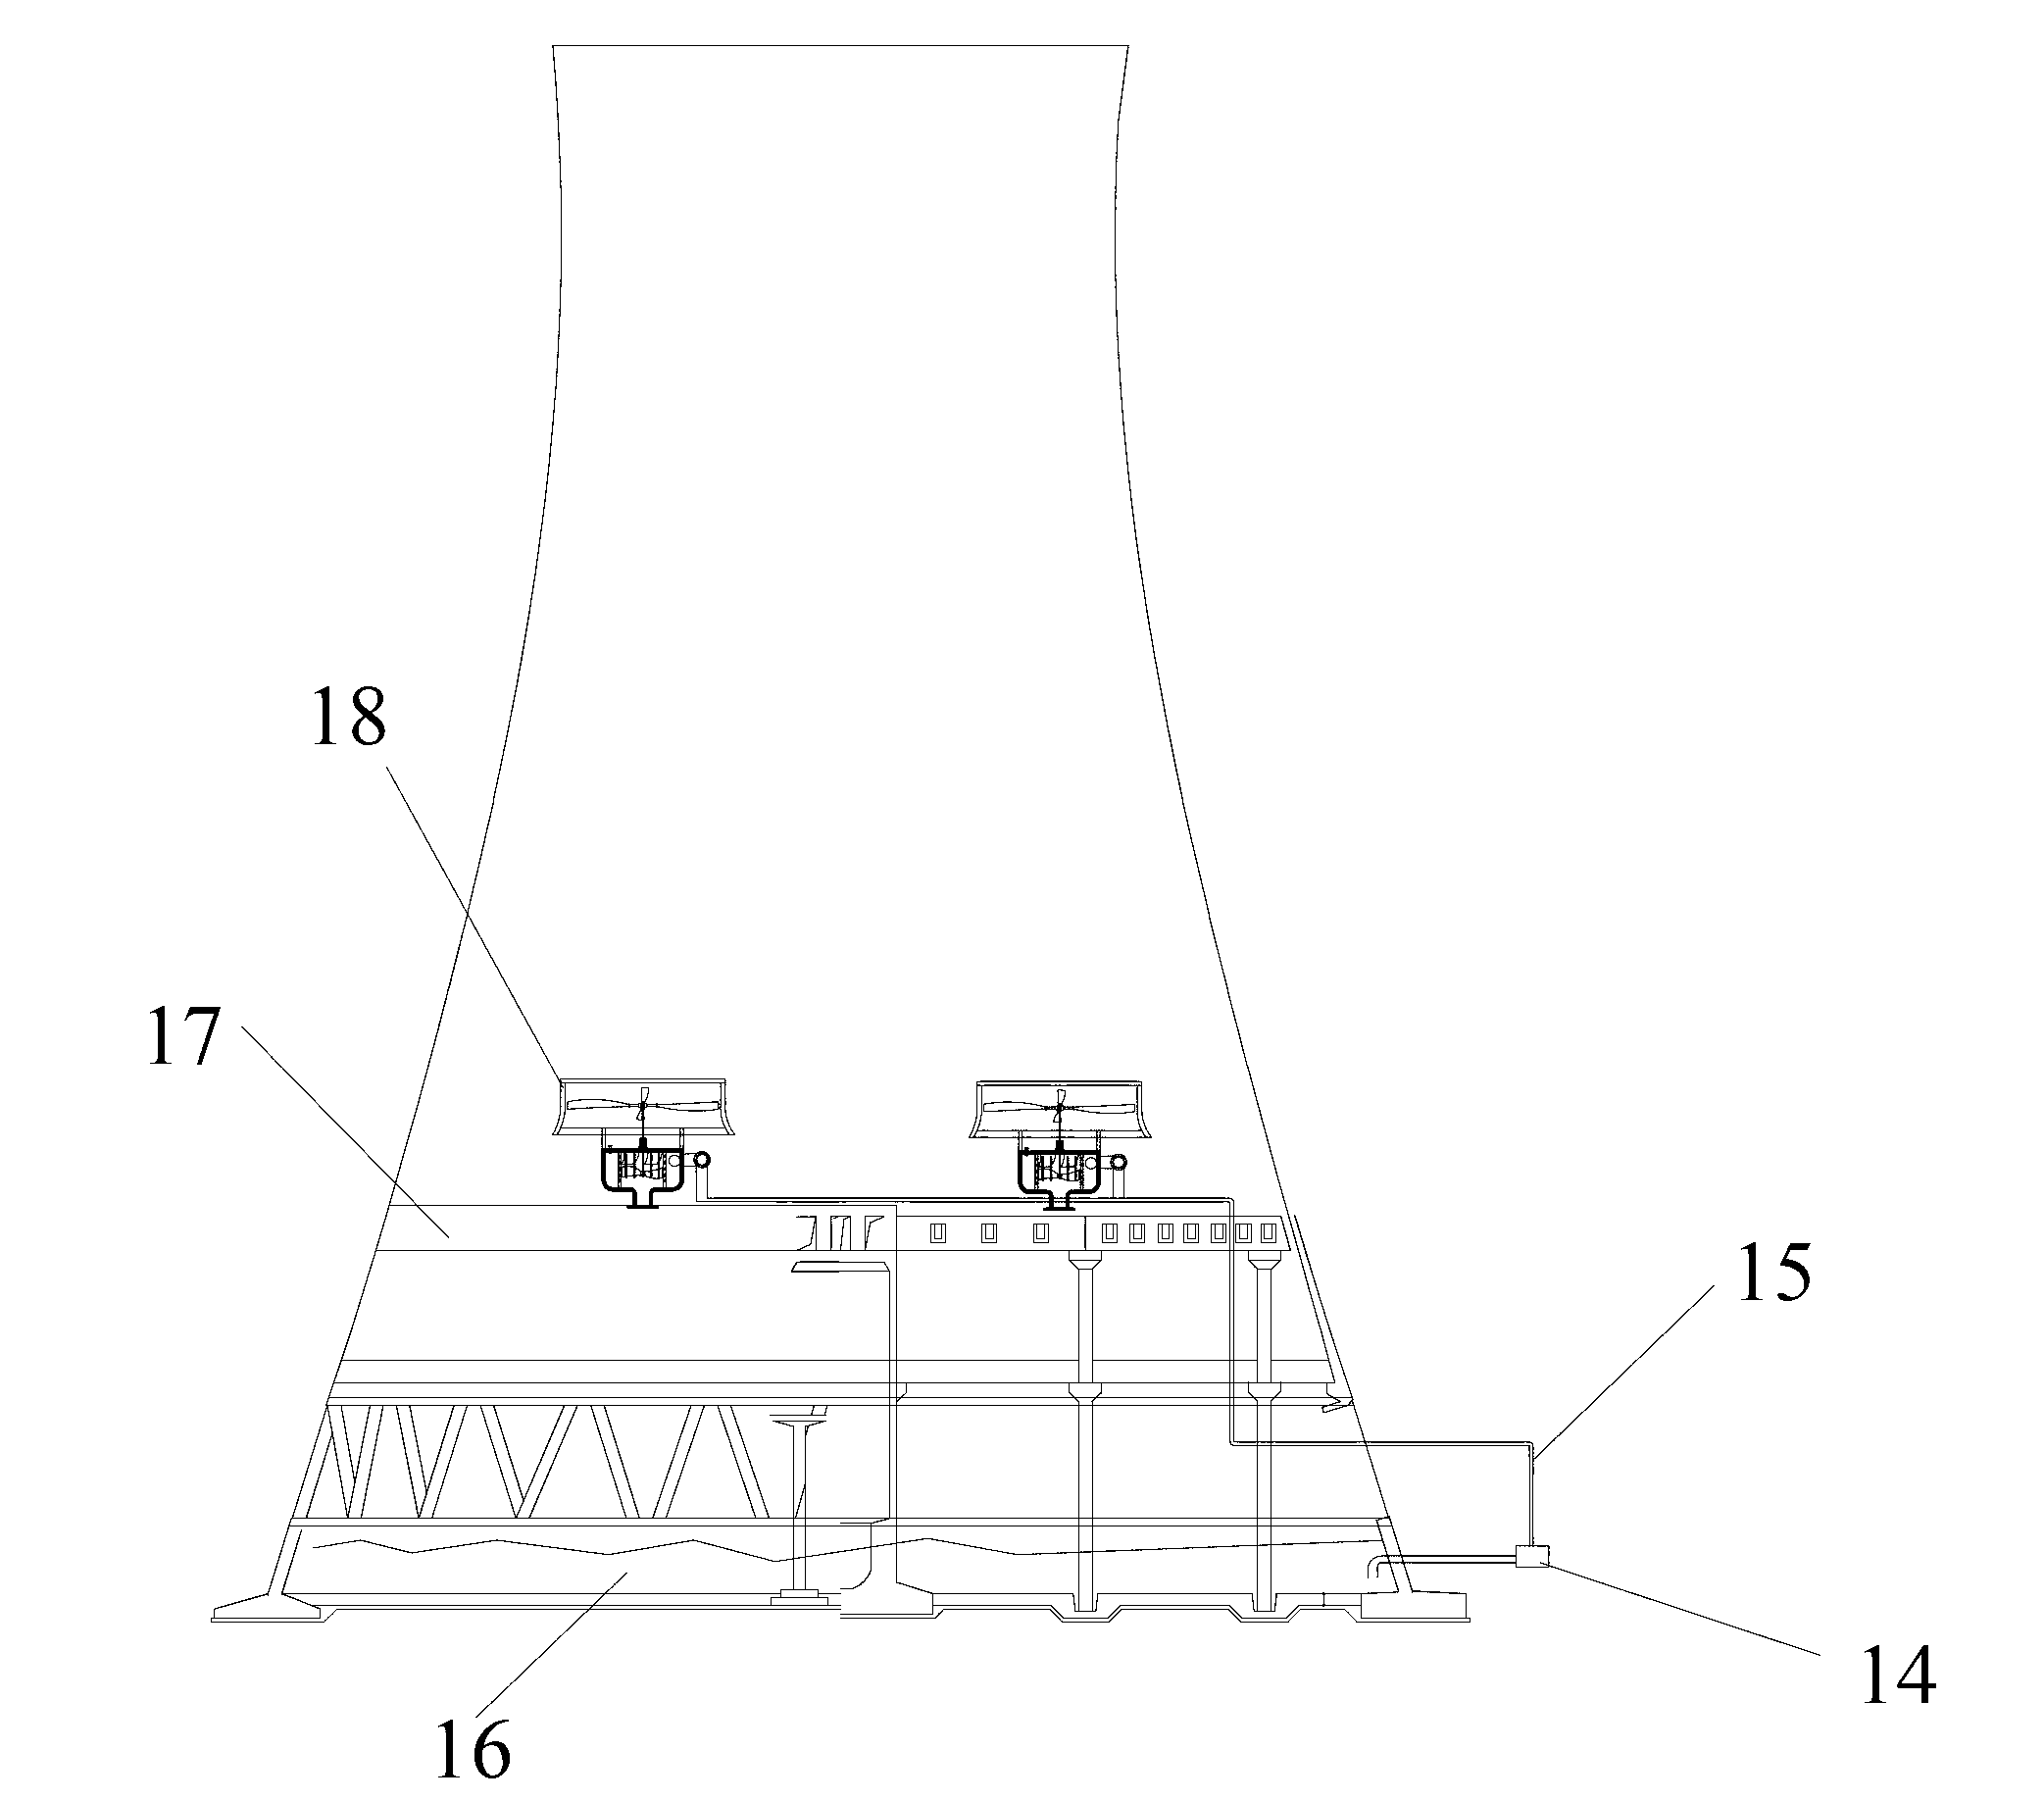 Hydrodynamic wind power propulsion device and cooling tower wind power system